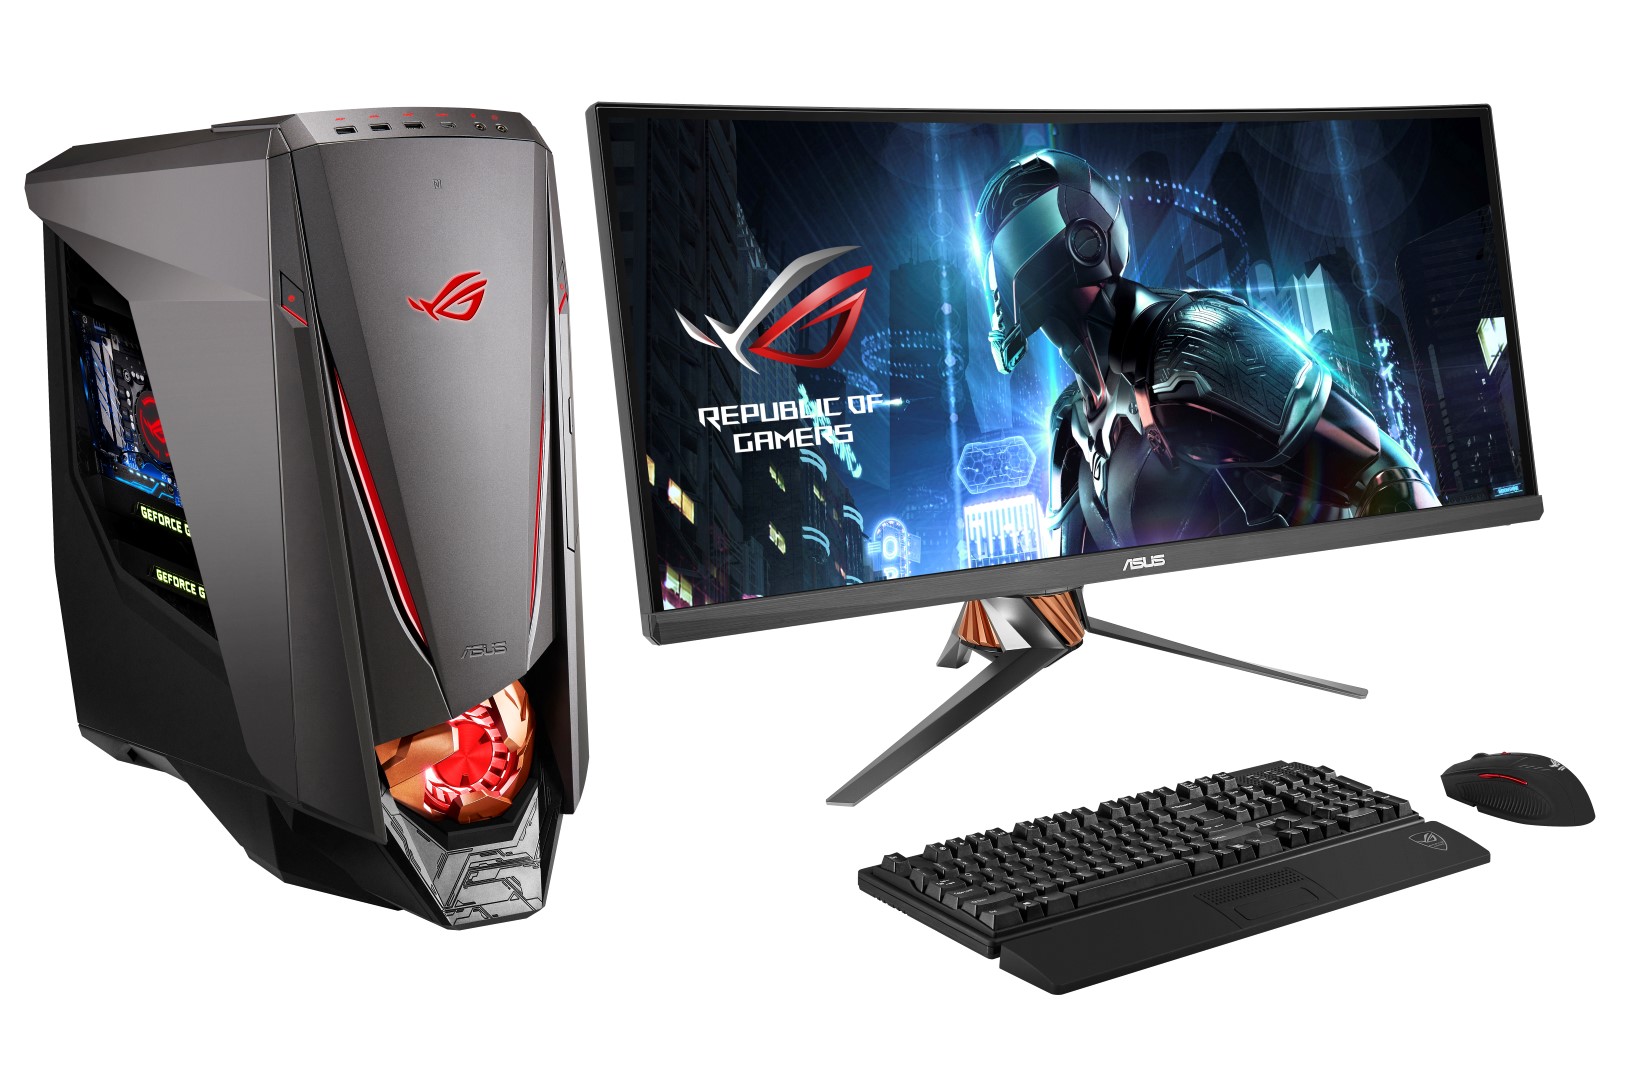 Hands on Asus  Republic of Gamers GT51CA gaming  PC  